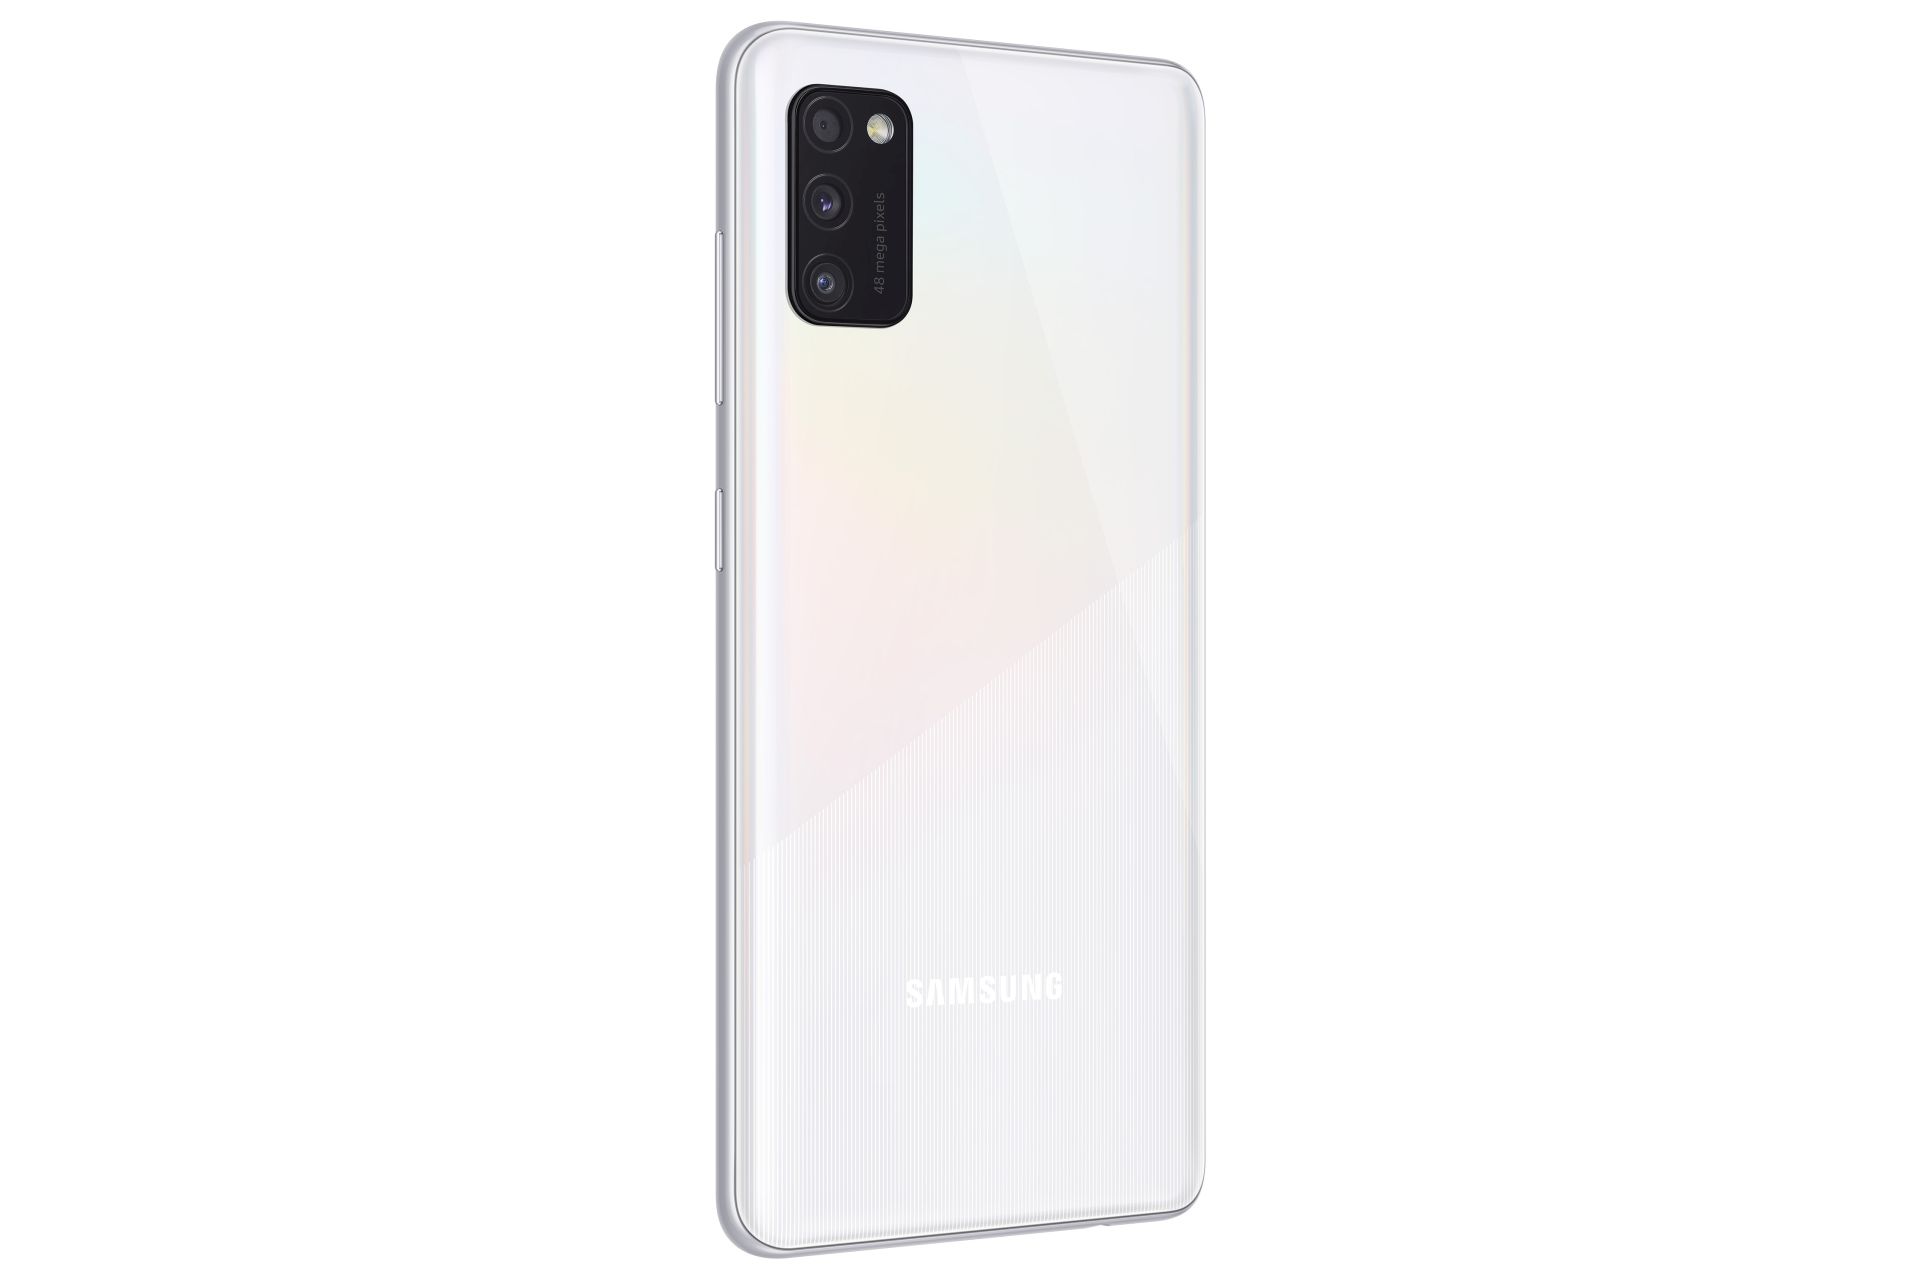 International Galaxy A41 is official, will be available in Europe